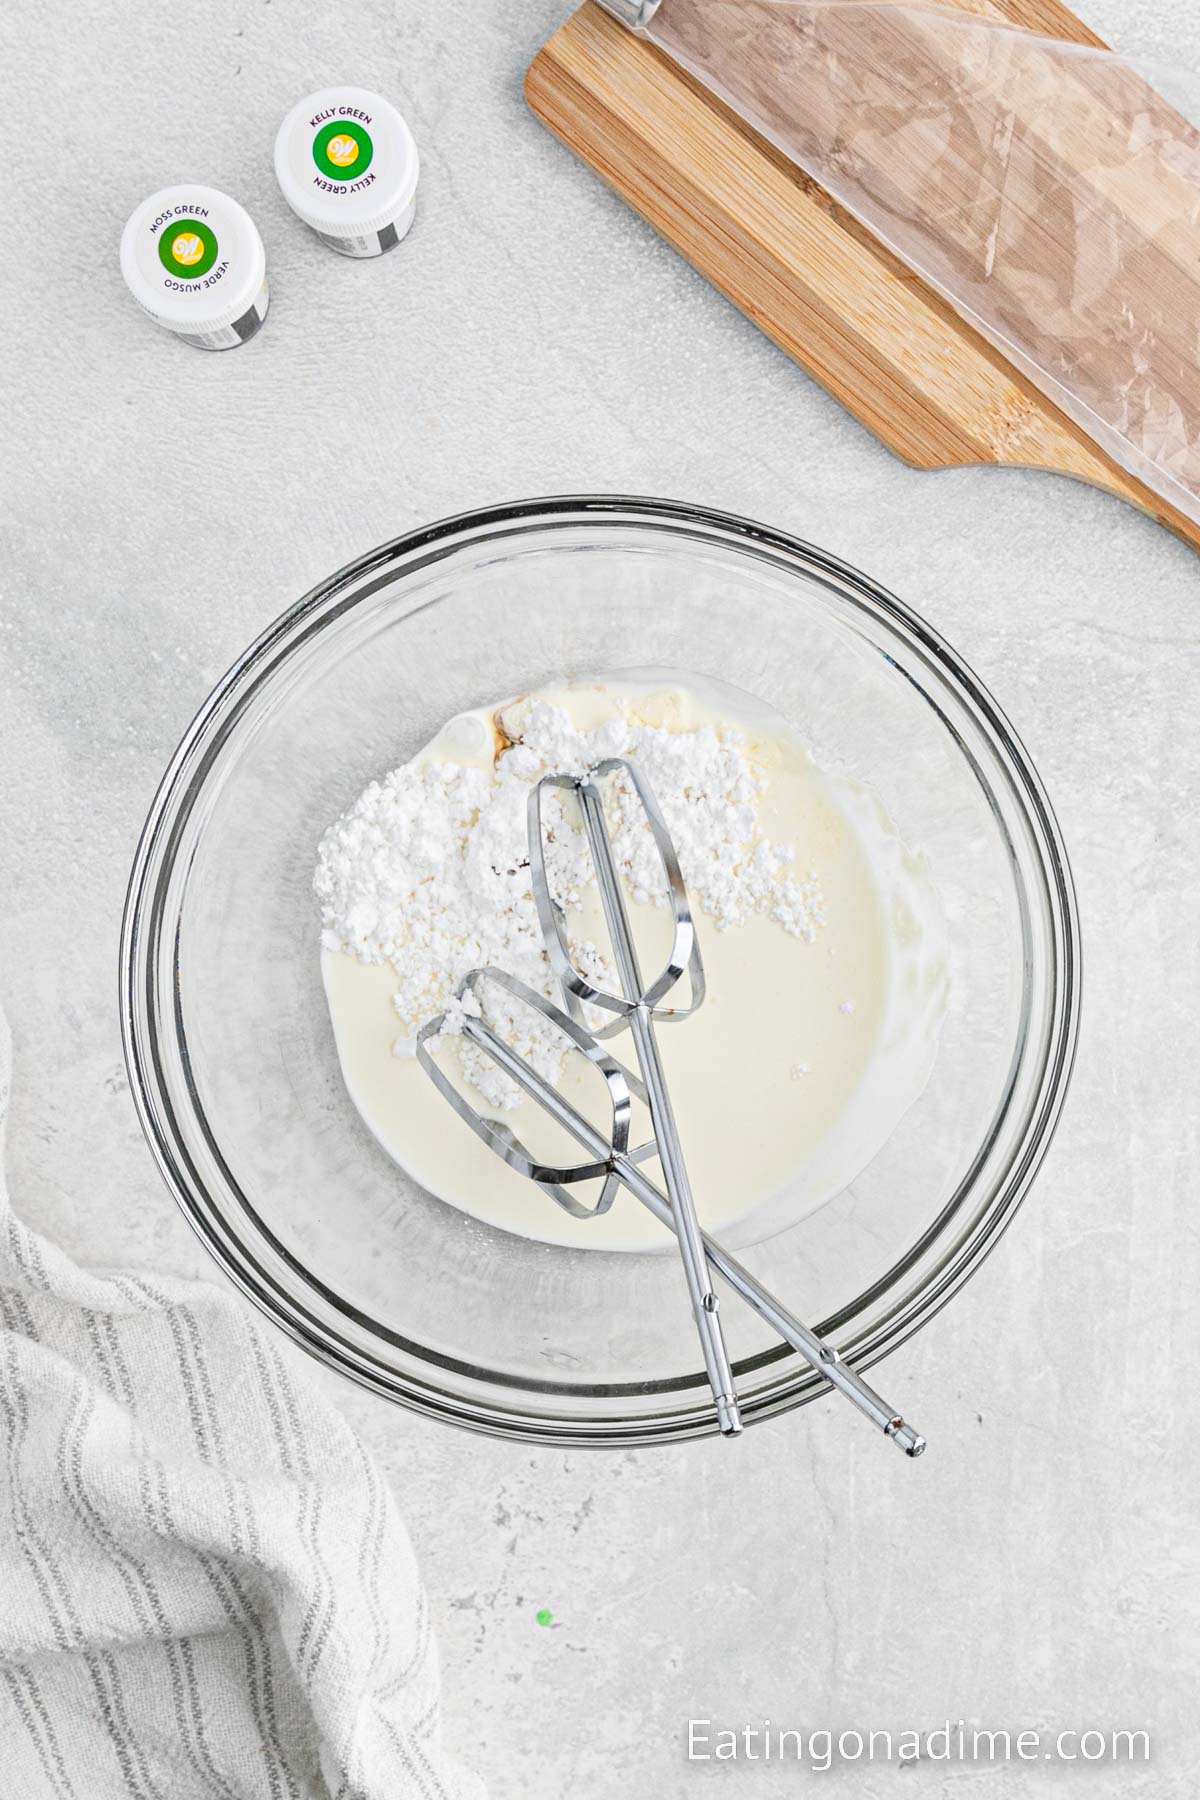 Combining the whipped cream, powdered sugar and vanilla in a bowl with a hand held mixer